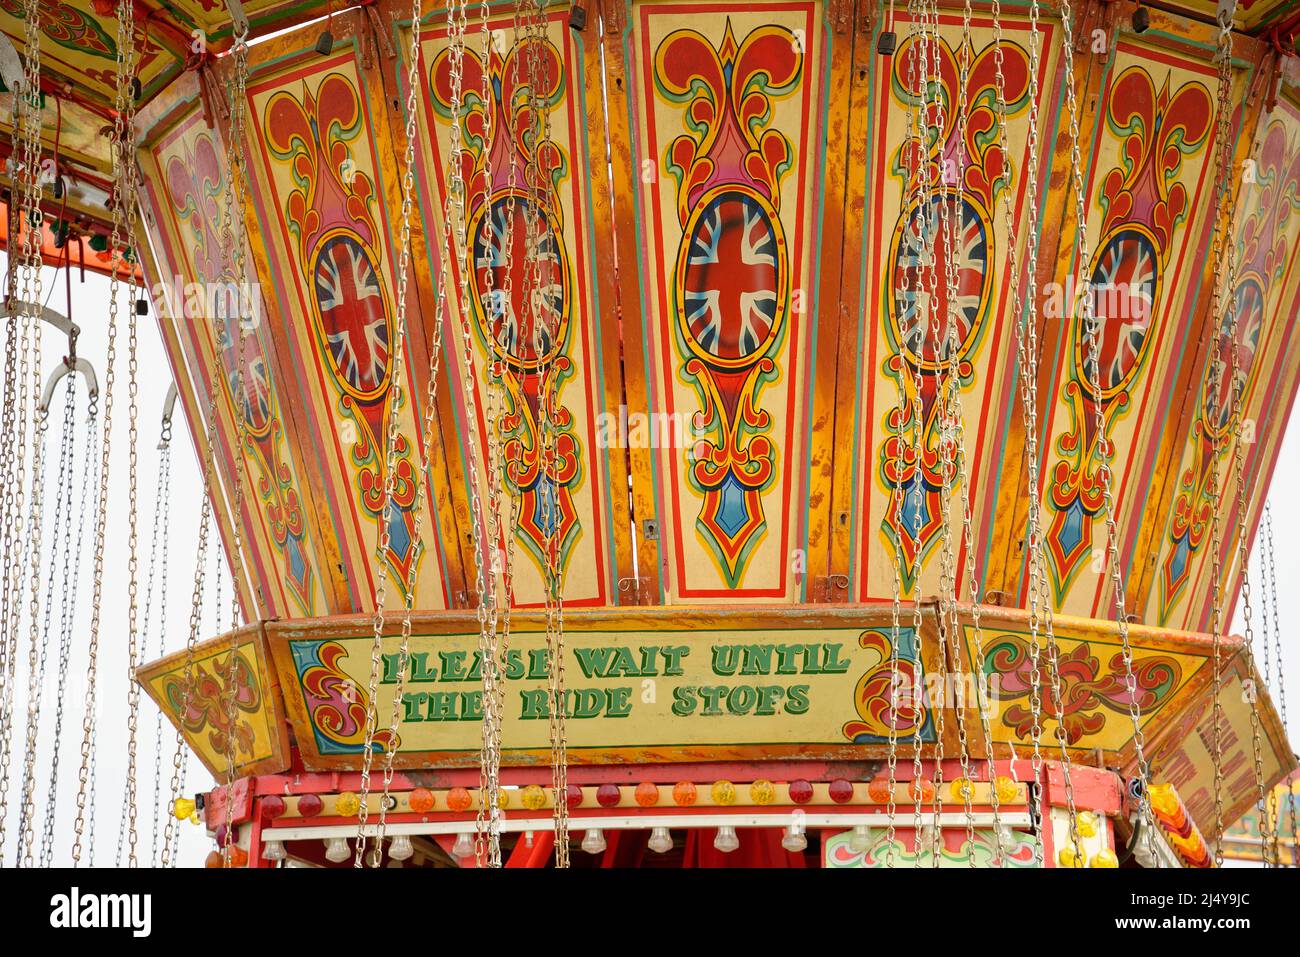 'Please Wait Until The Ride Stops' sign on a fairground swinging chairs ride. Stock Photo